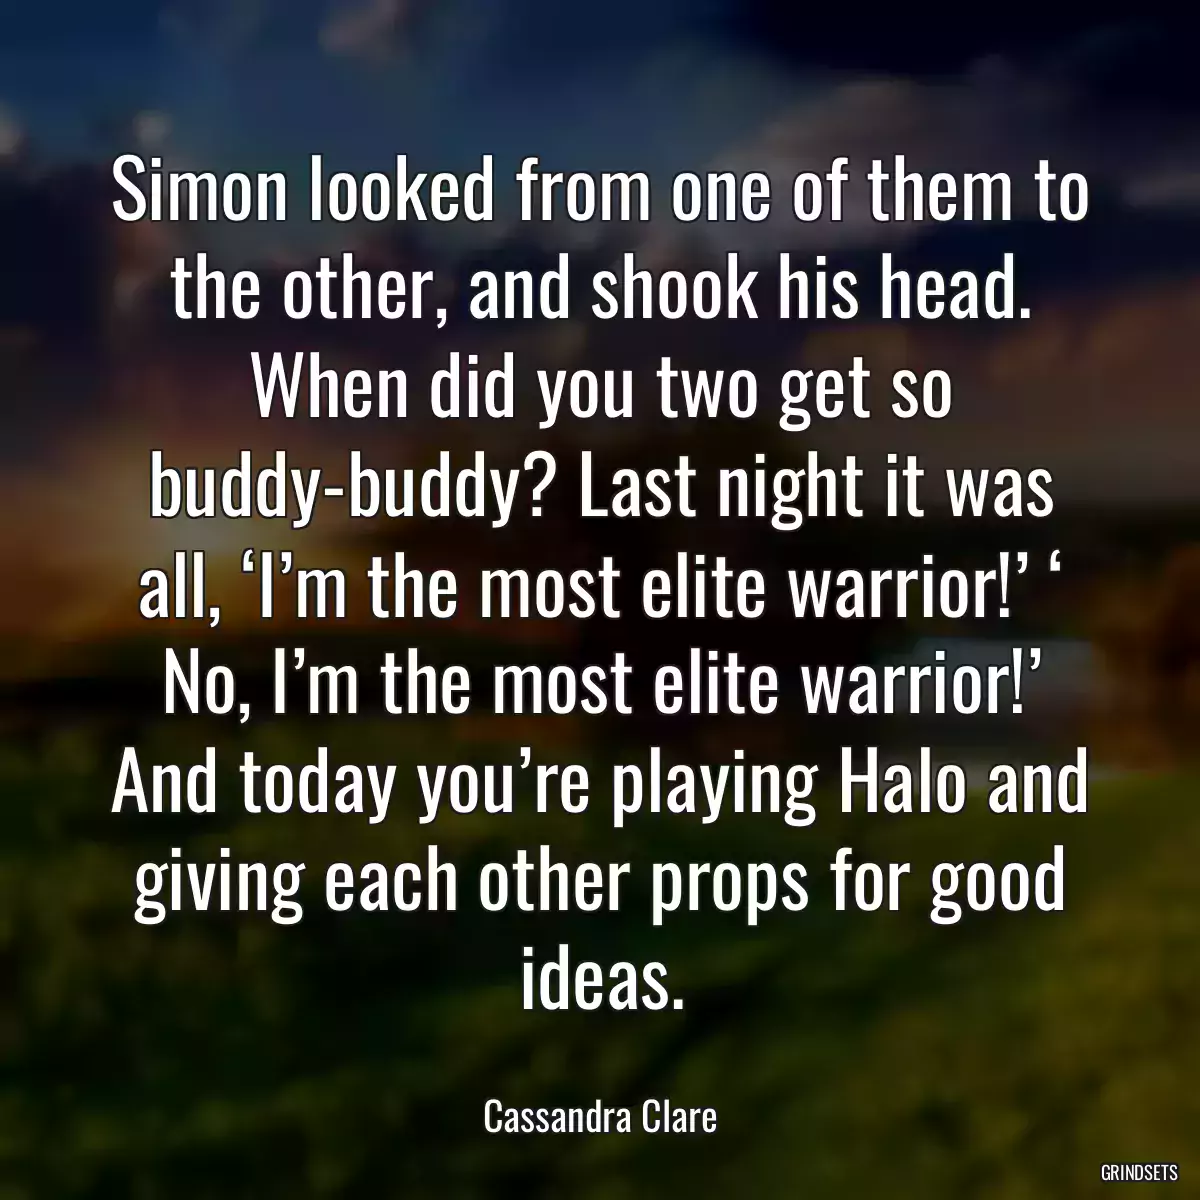 Simon looked from one of them to the other, and shook his head. When did you two get so buddy-buddy? Last night it was all, ‘I’m the most elite warrior!’ ‘ No, I’m the most elite warrior!’ And today you’re playing Halo and giving each other props for good ideas.